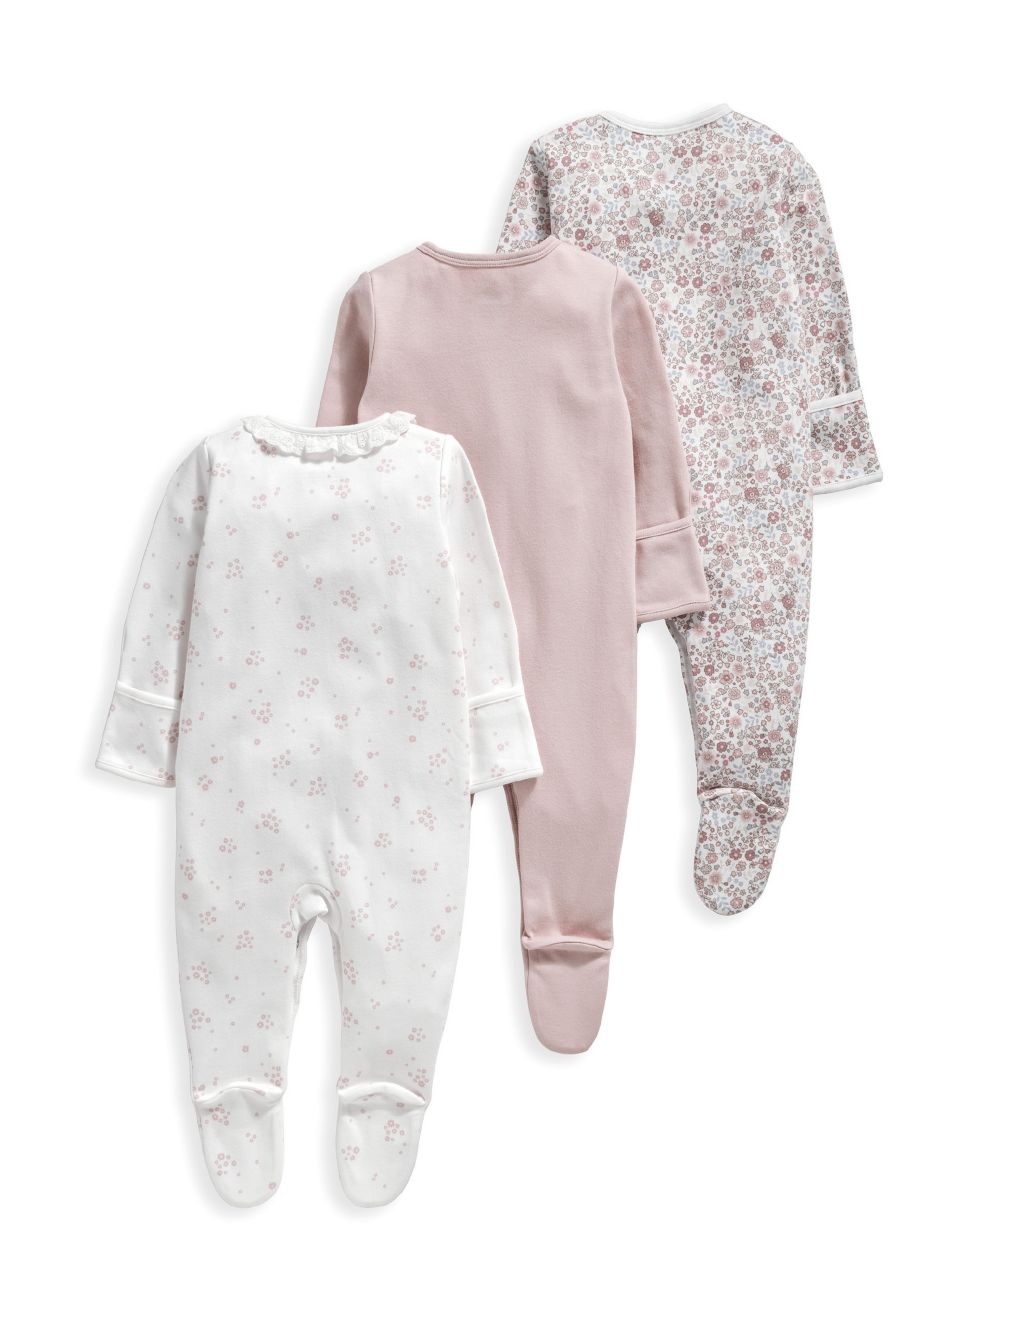 Oh Darling Girl Sleepsuits 3 Pack (6½lbs-18 Mths) image 3